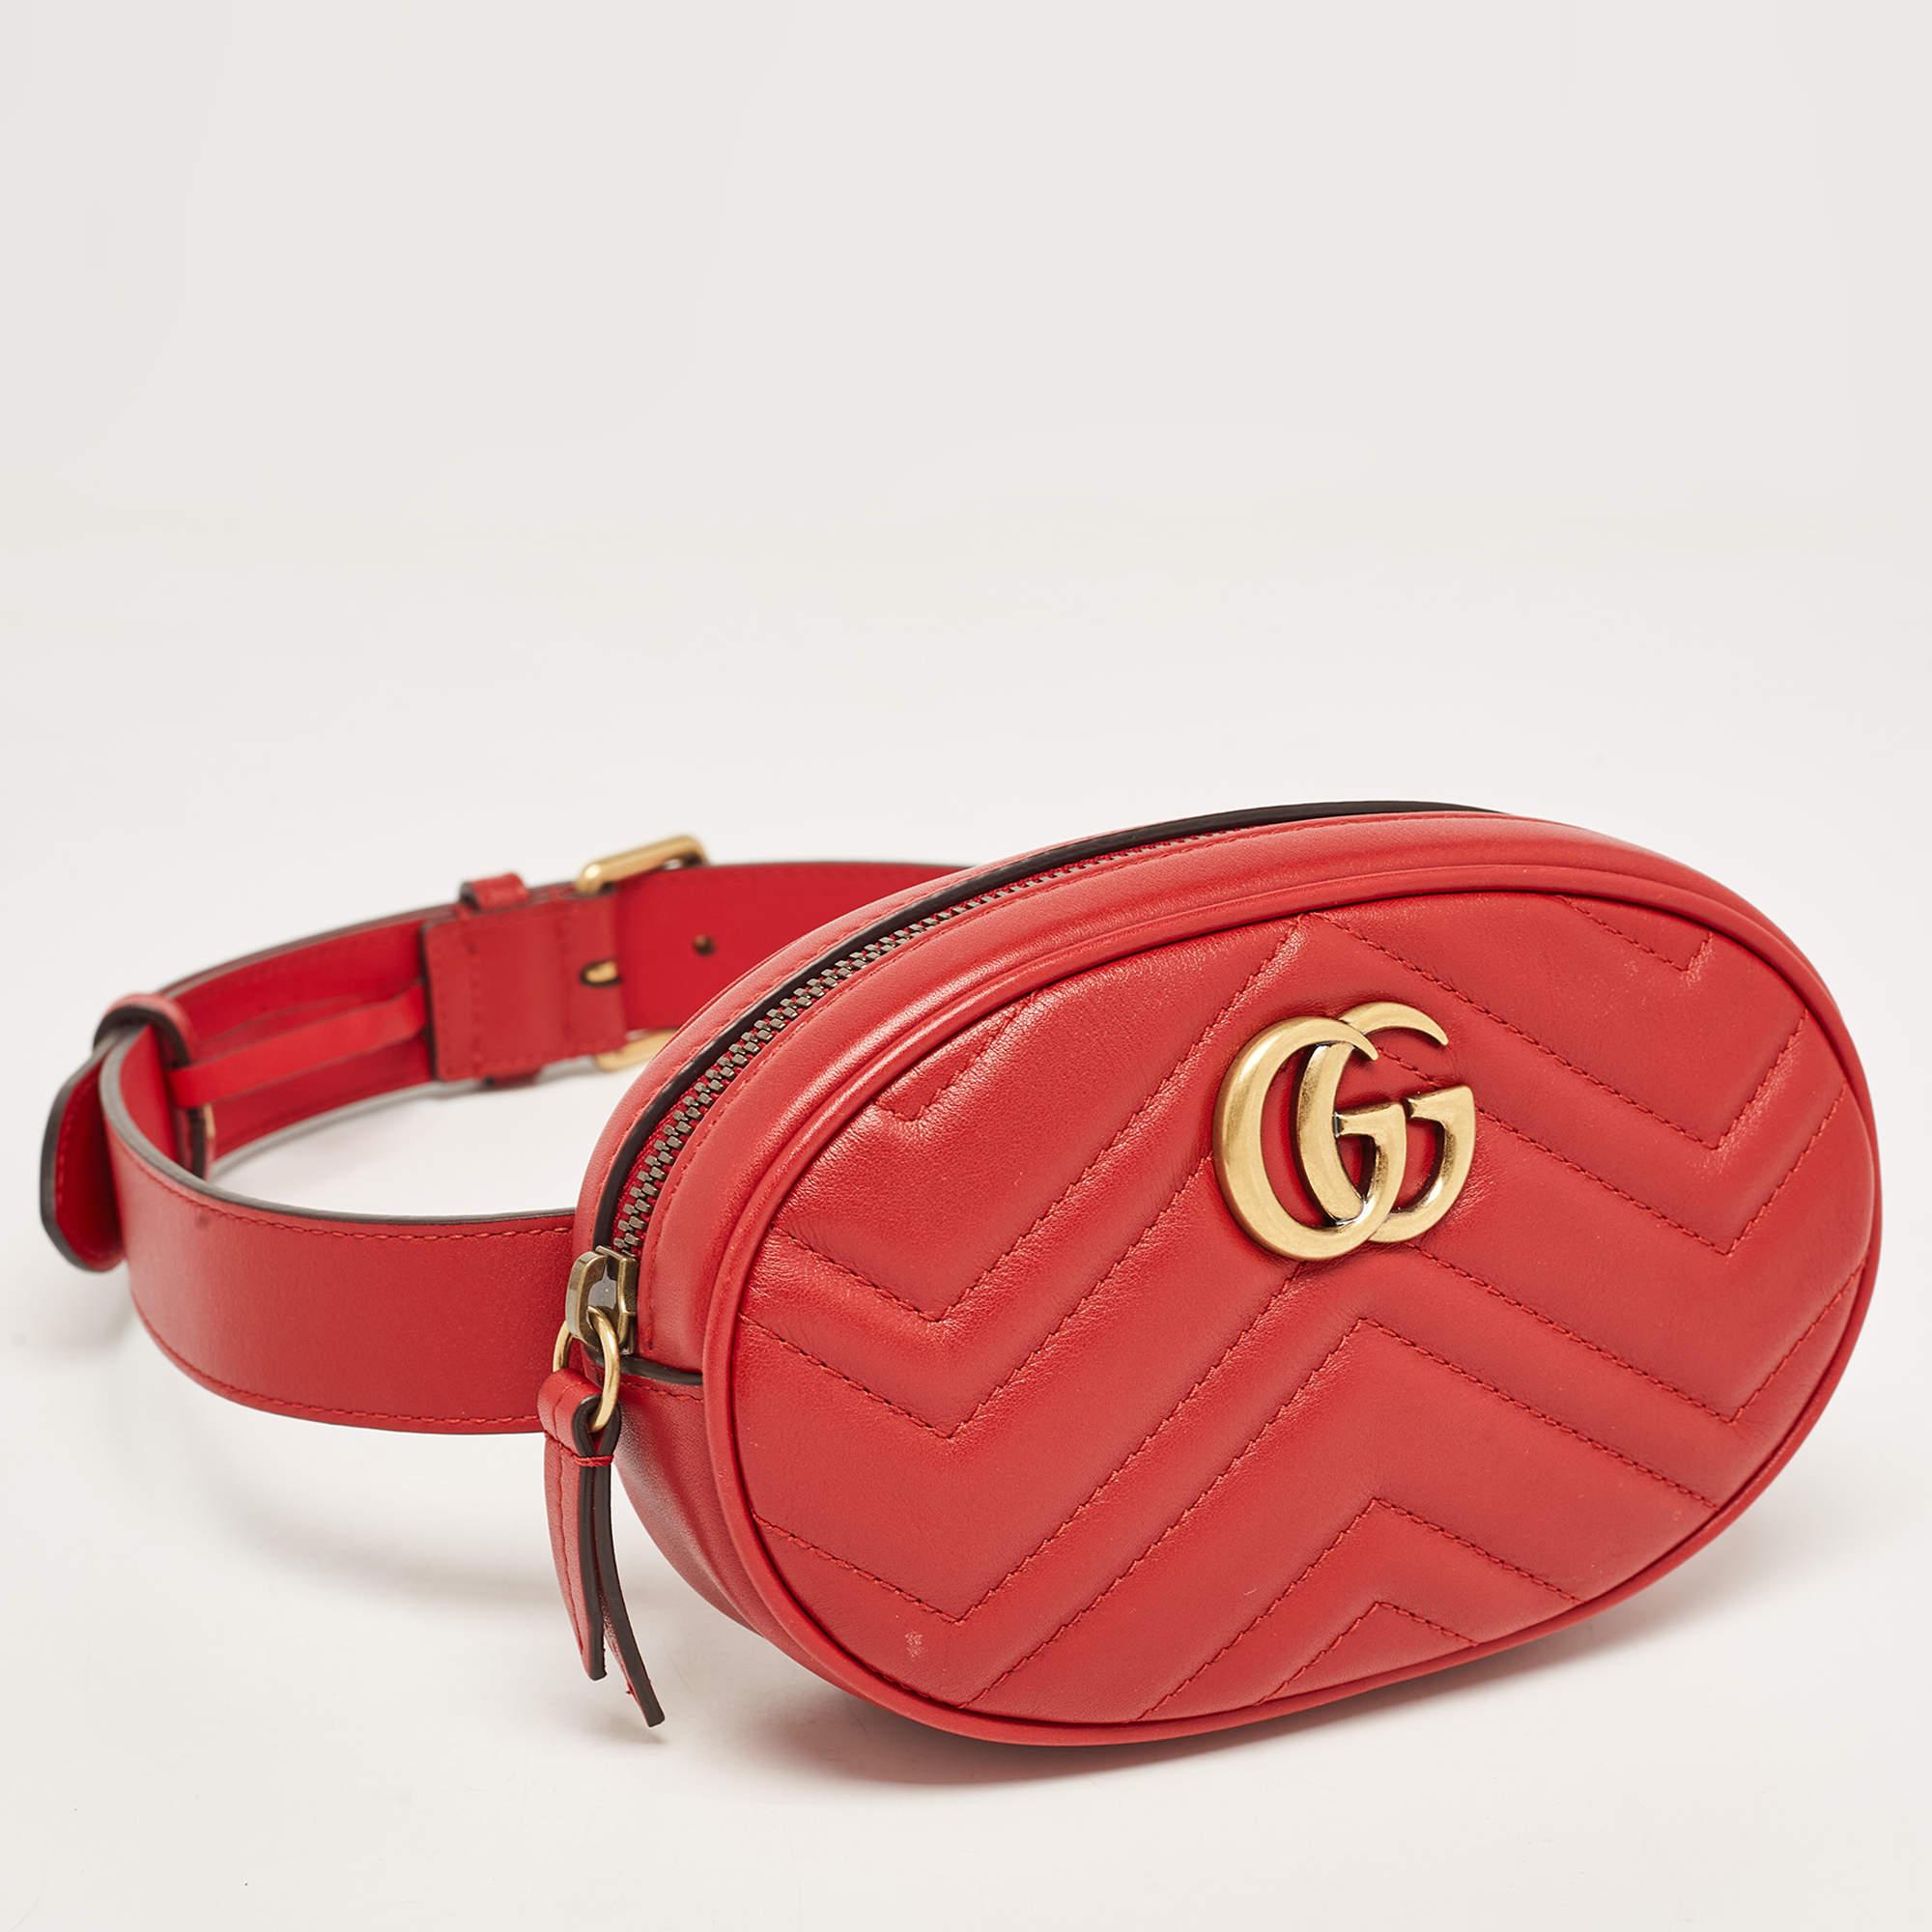 The Gucci belt bag is a luxurious accessory featuring a quilted matelassé pattern, crafted from red leather. The iconic GG logo is elegantly embossed, and the bag can be worn around the waist, offering both style and practicality.

